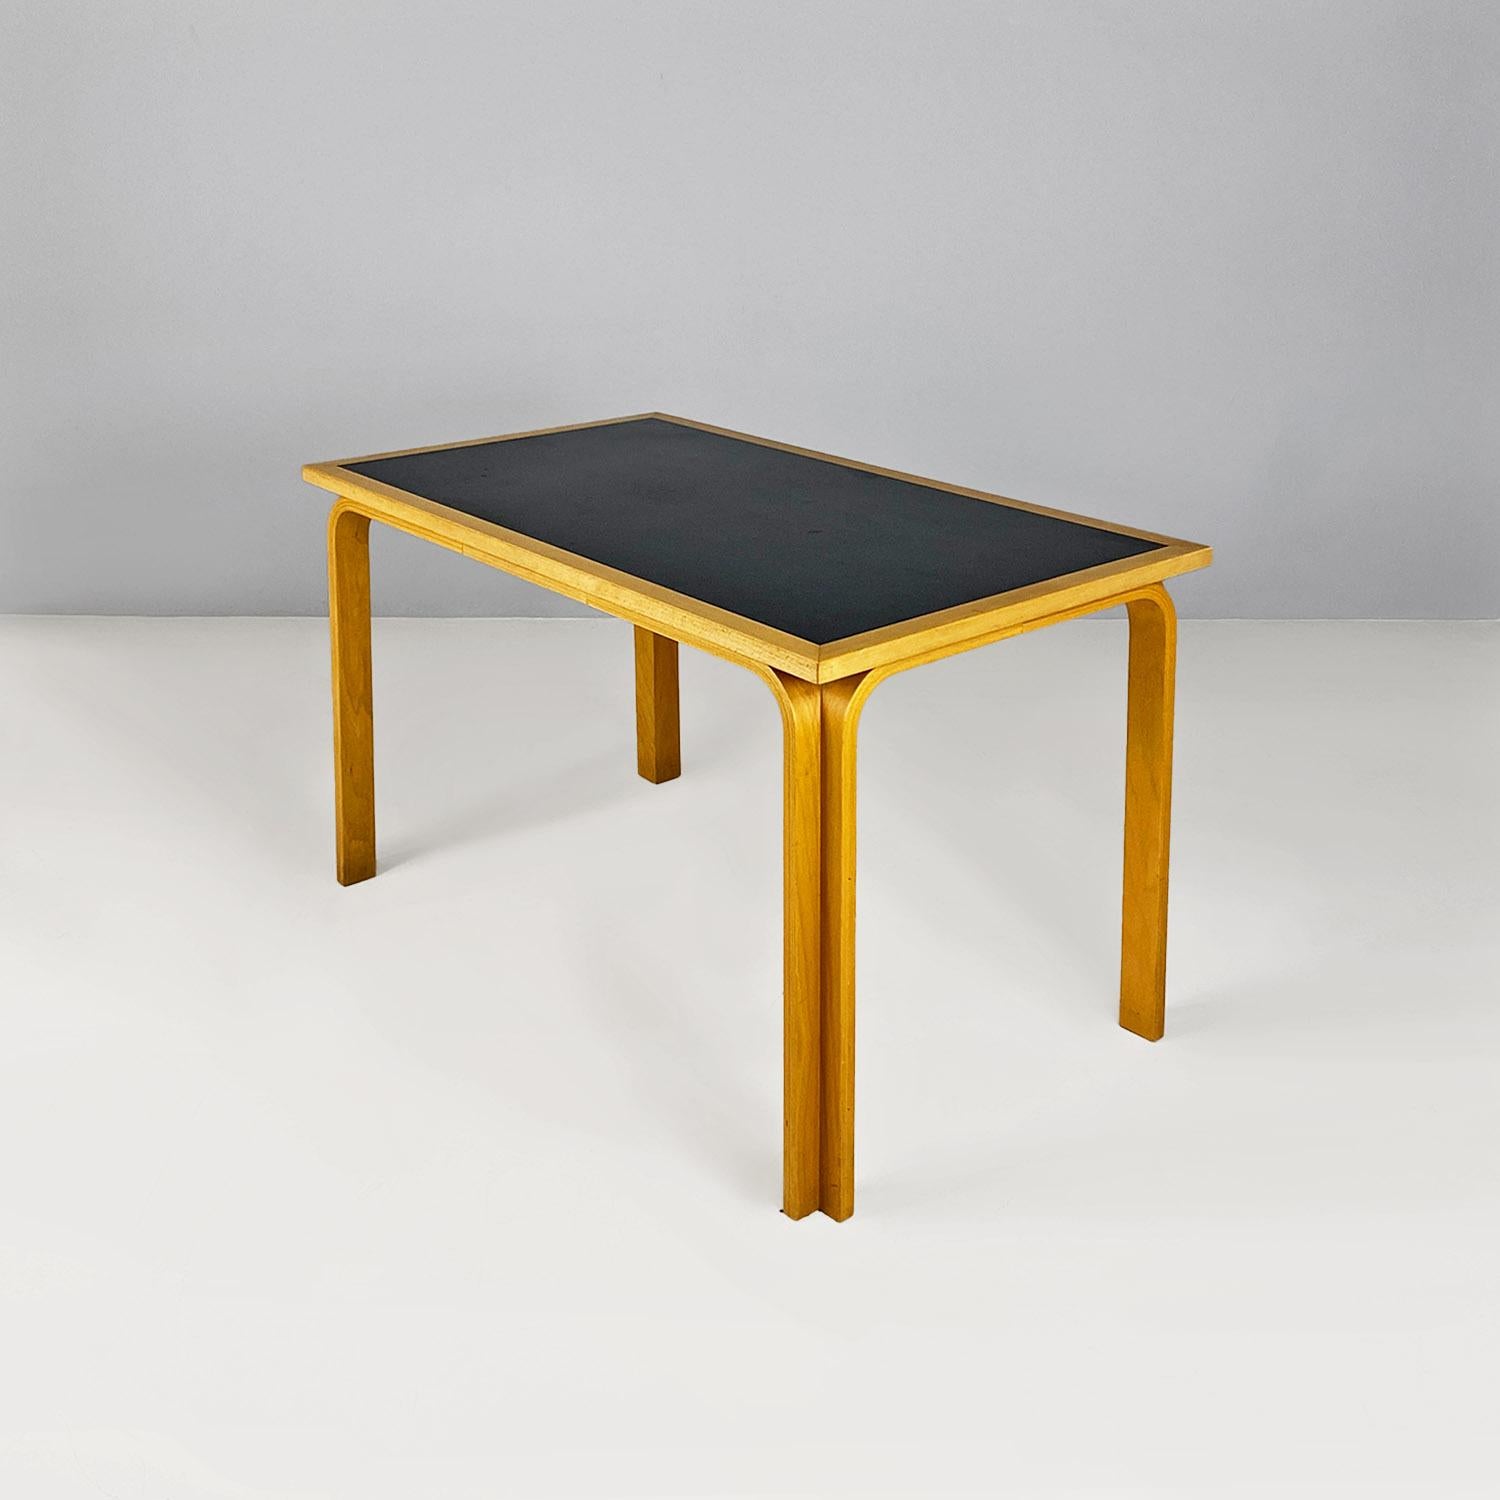 Danish beechwood dining table by Thygesen and Sorensen for Magnus Olesen, 1970s.
Danish dining table model DK 7870, rectangular in shape, with curved solid wood legs and black linoeum top.
Designed by Magnus Olesen in approx. 1960, production label